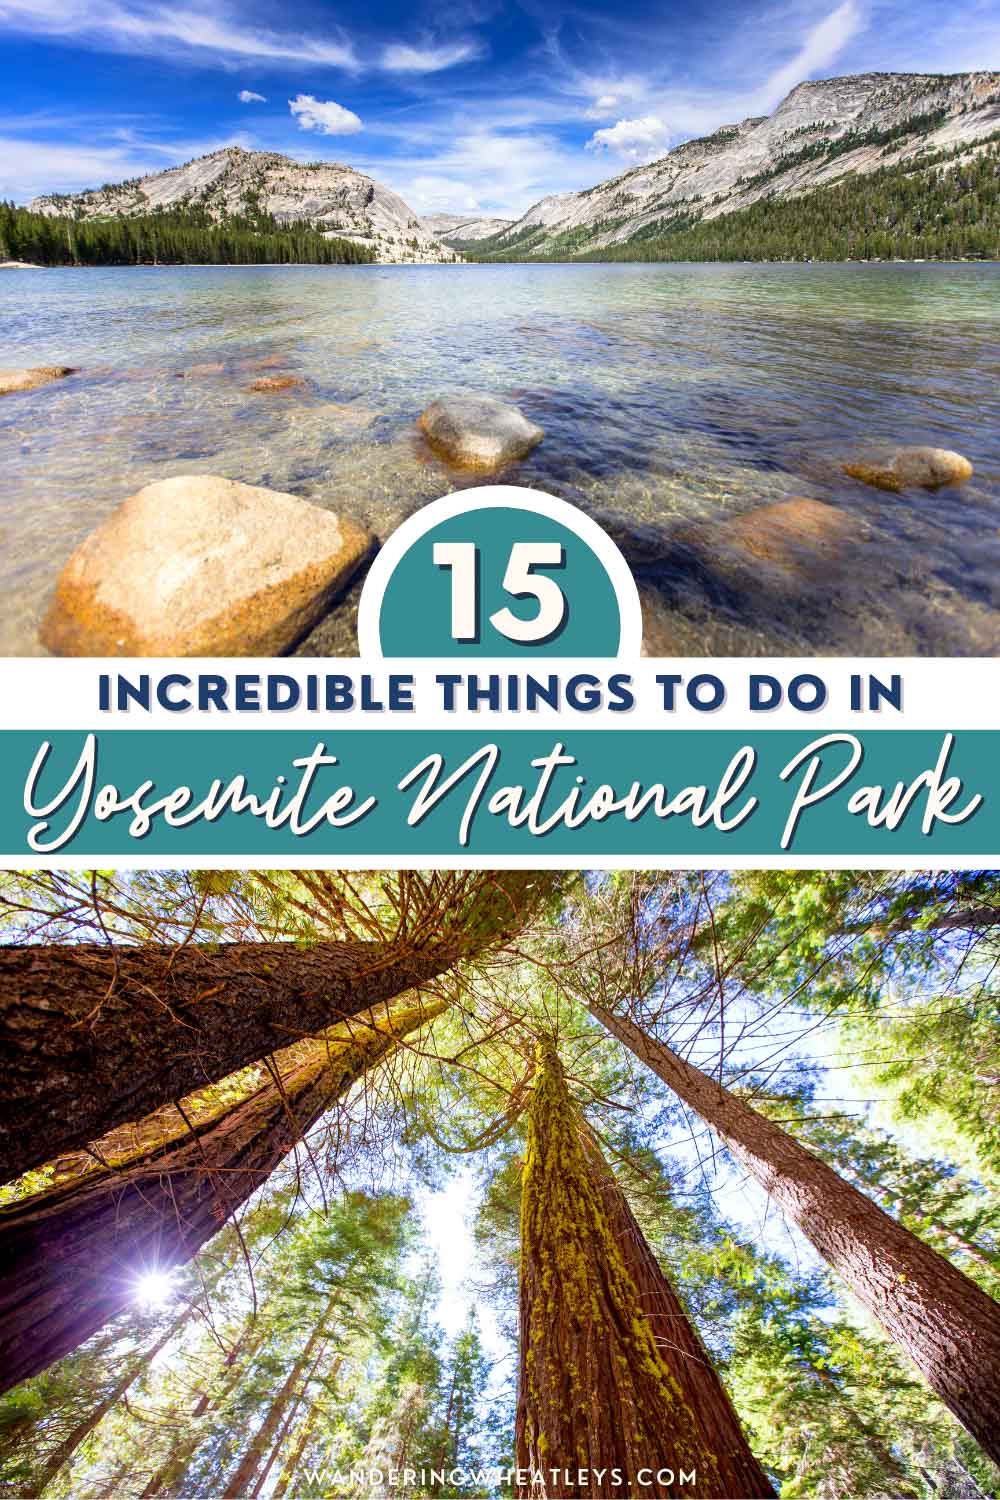 The Best Things to do in Yosemite National Park